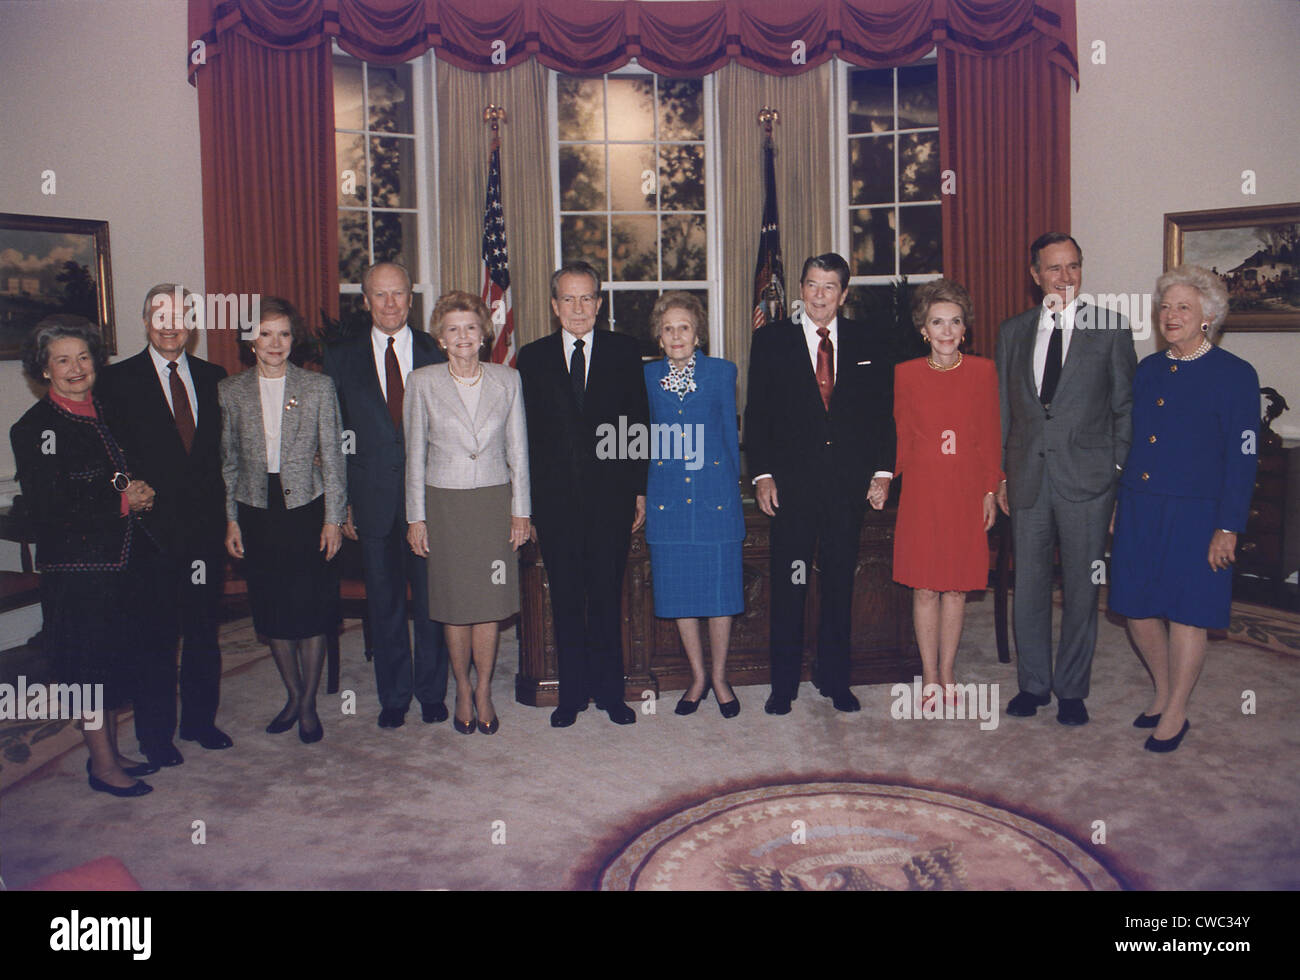 Four presidents and five first ladies pose in an Oval Office replica at the Dedication of the Ronald Reagan Presidential Stock Photo